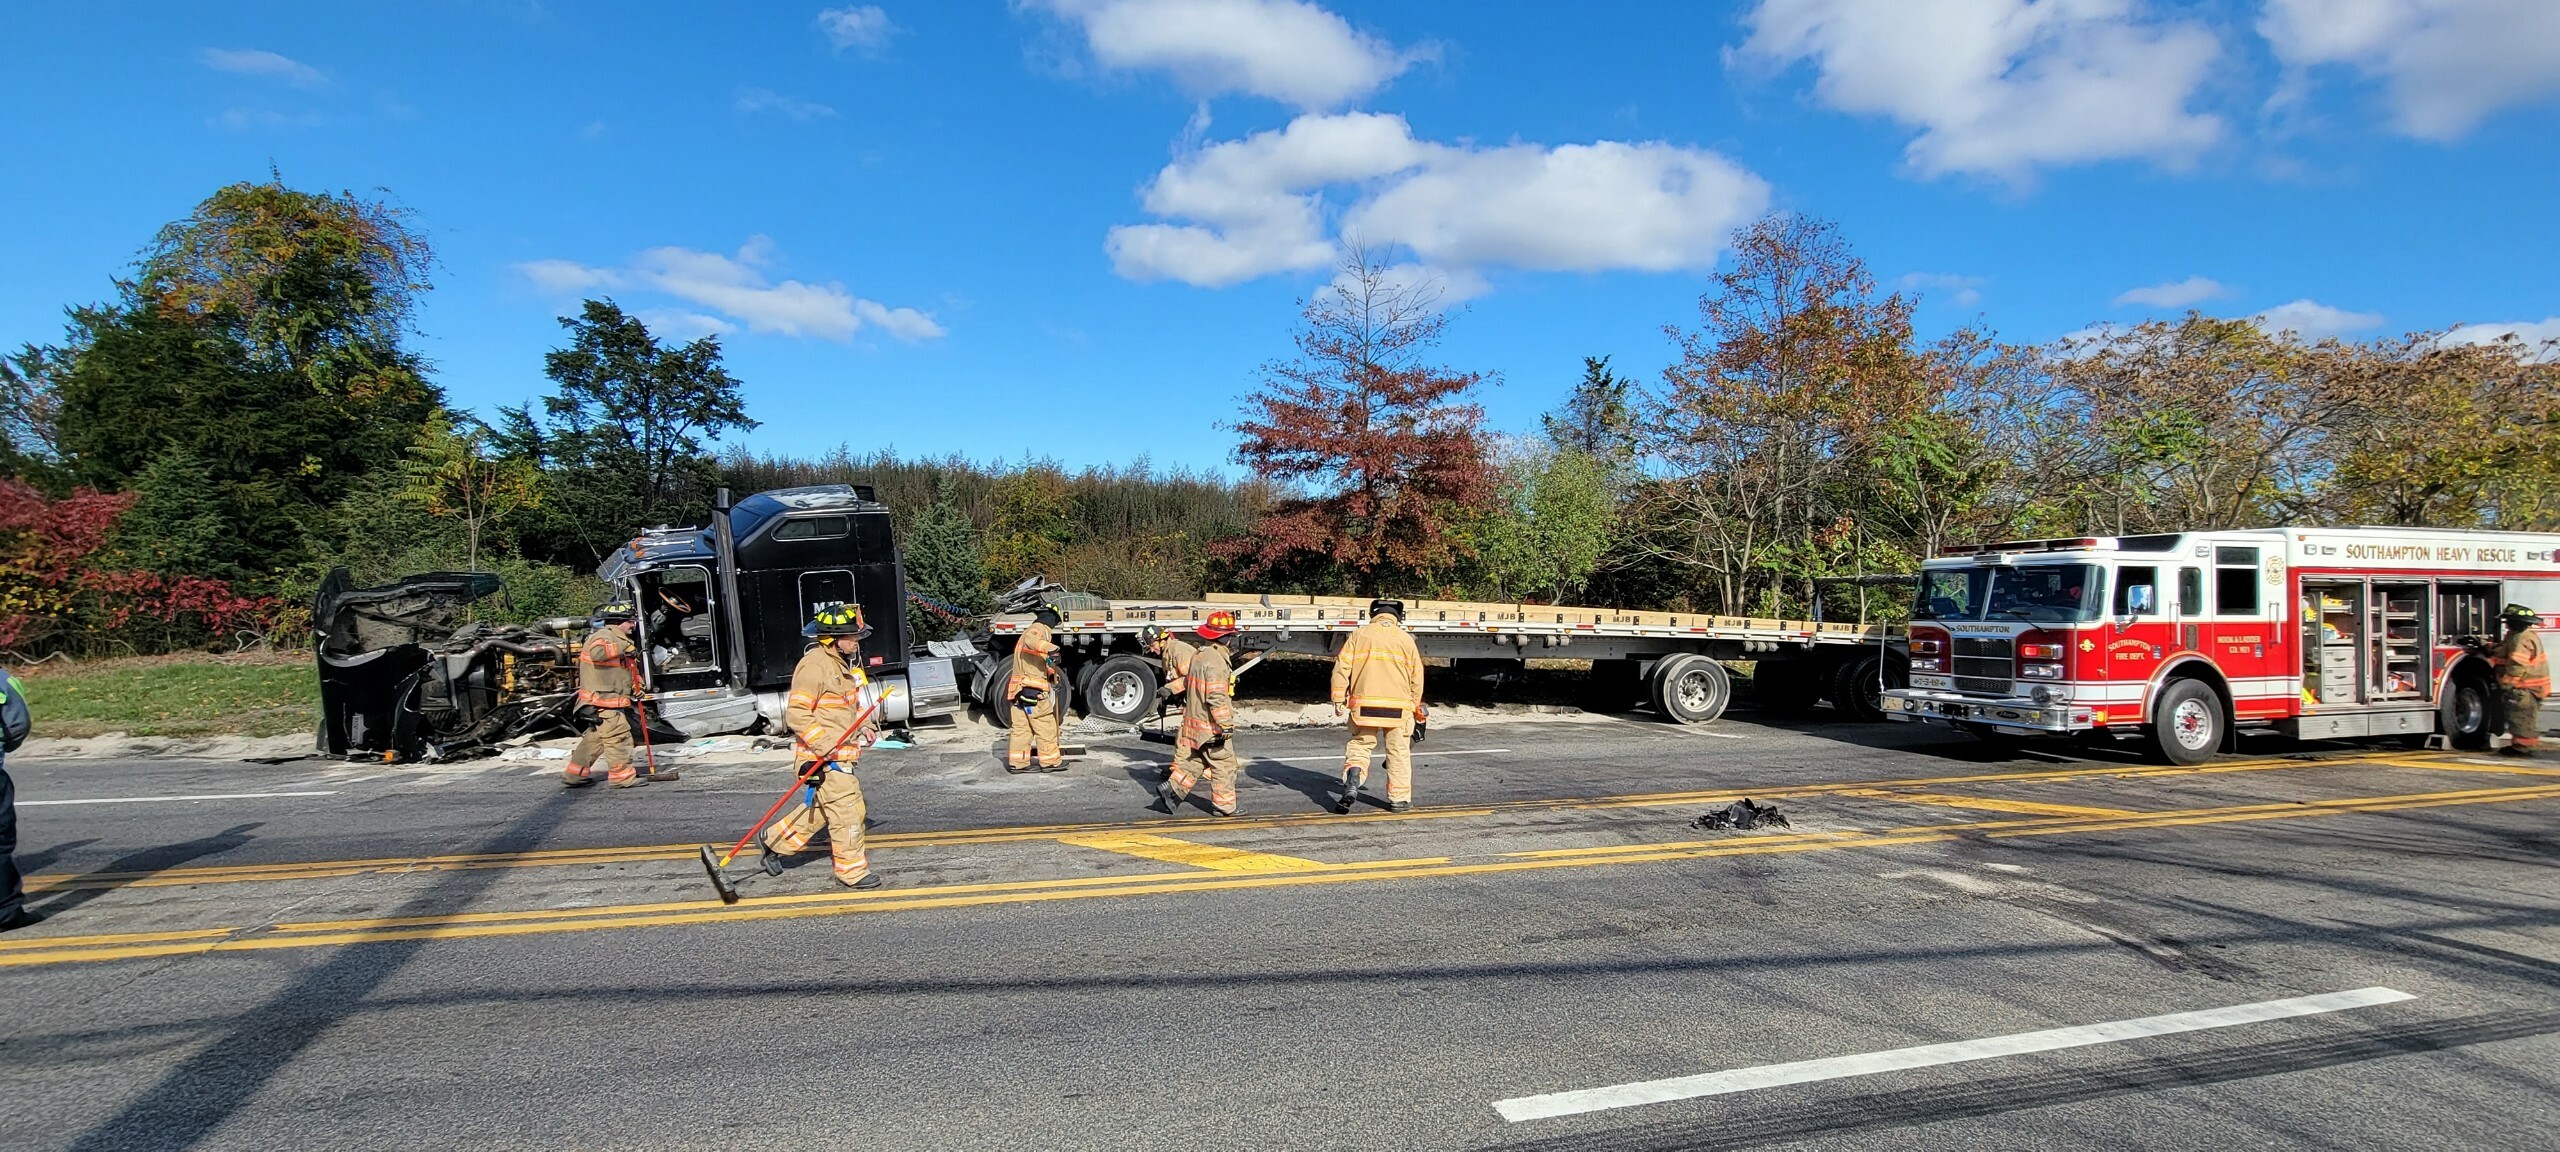 Cleaning up after the November 9 crash on County Road 39 in Southampton.    COURTESY SOUTHAMPTON FIRE DEPARTMENT.